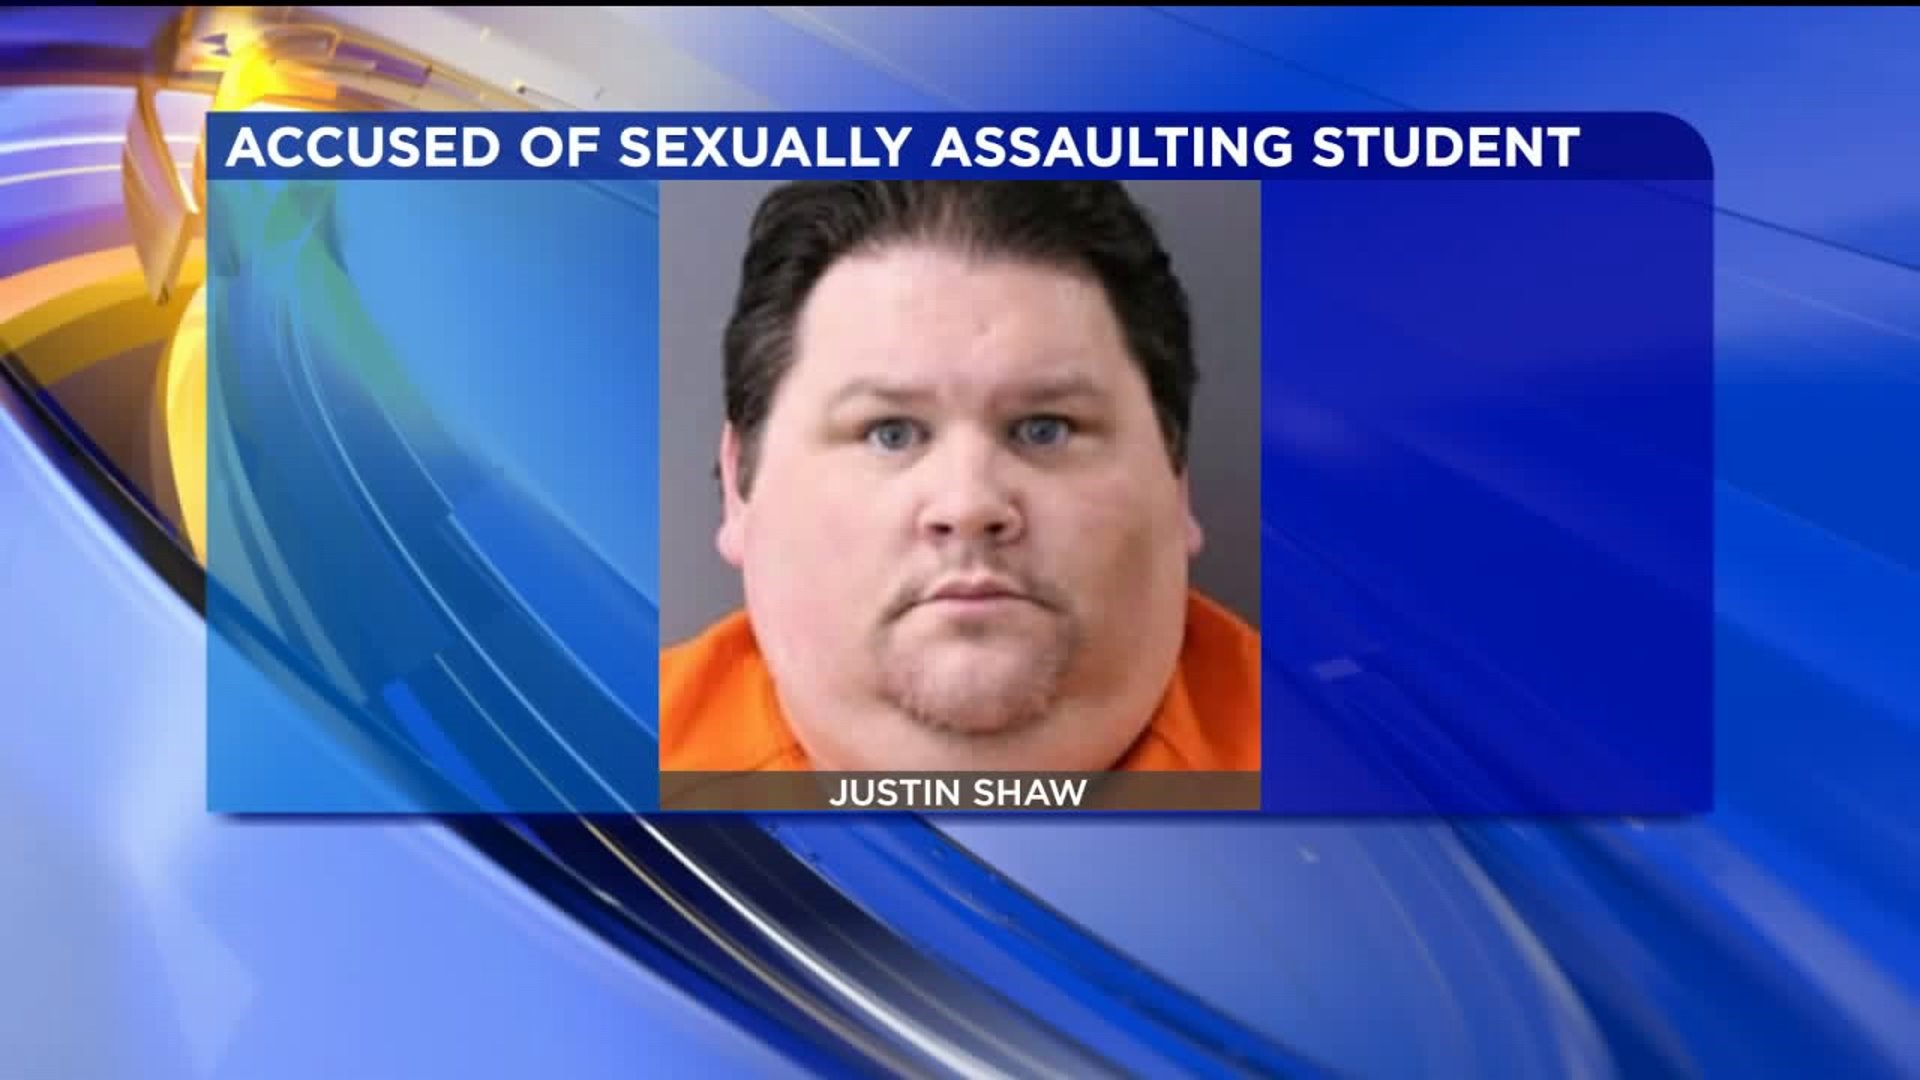 Former Drama Director Accused of Sexually Assaulting Student